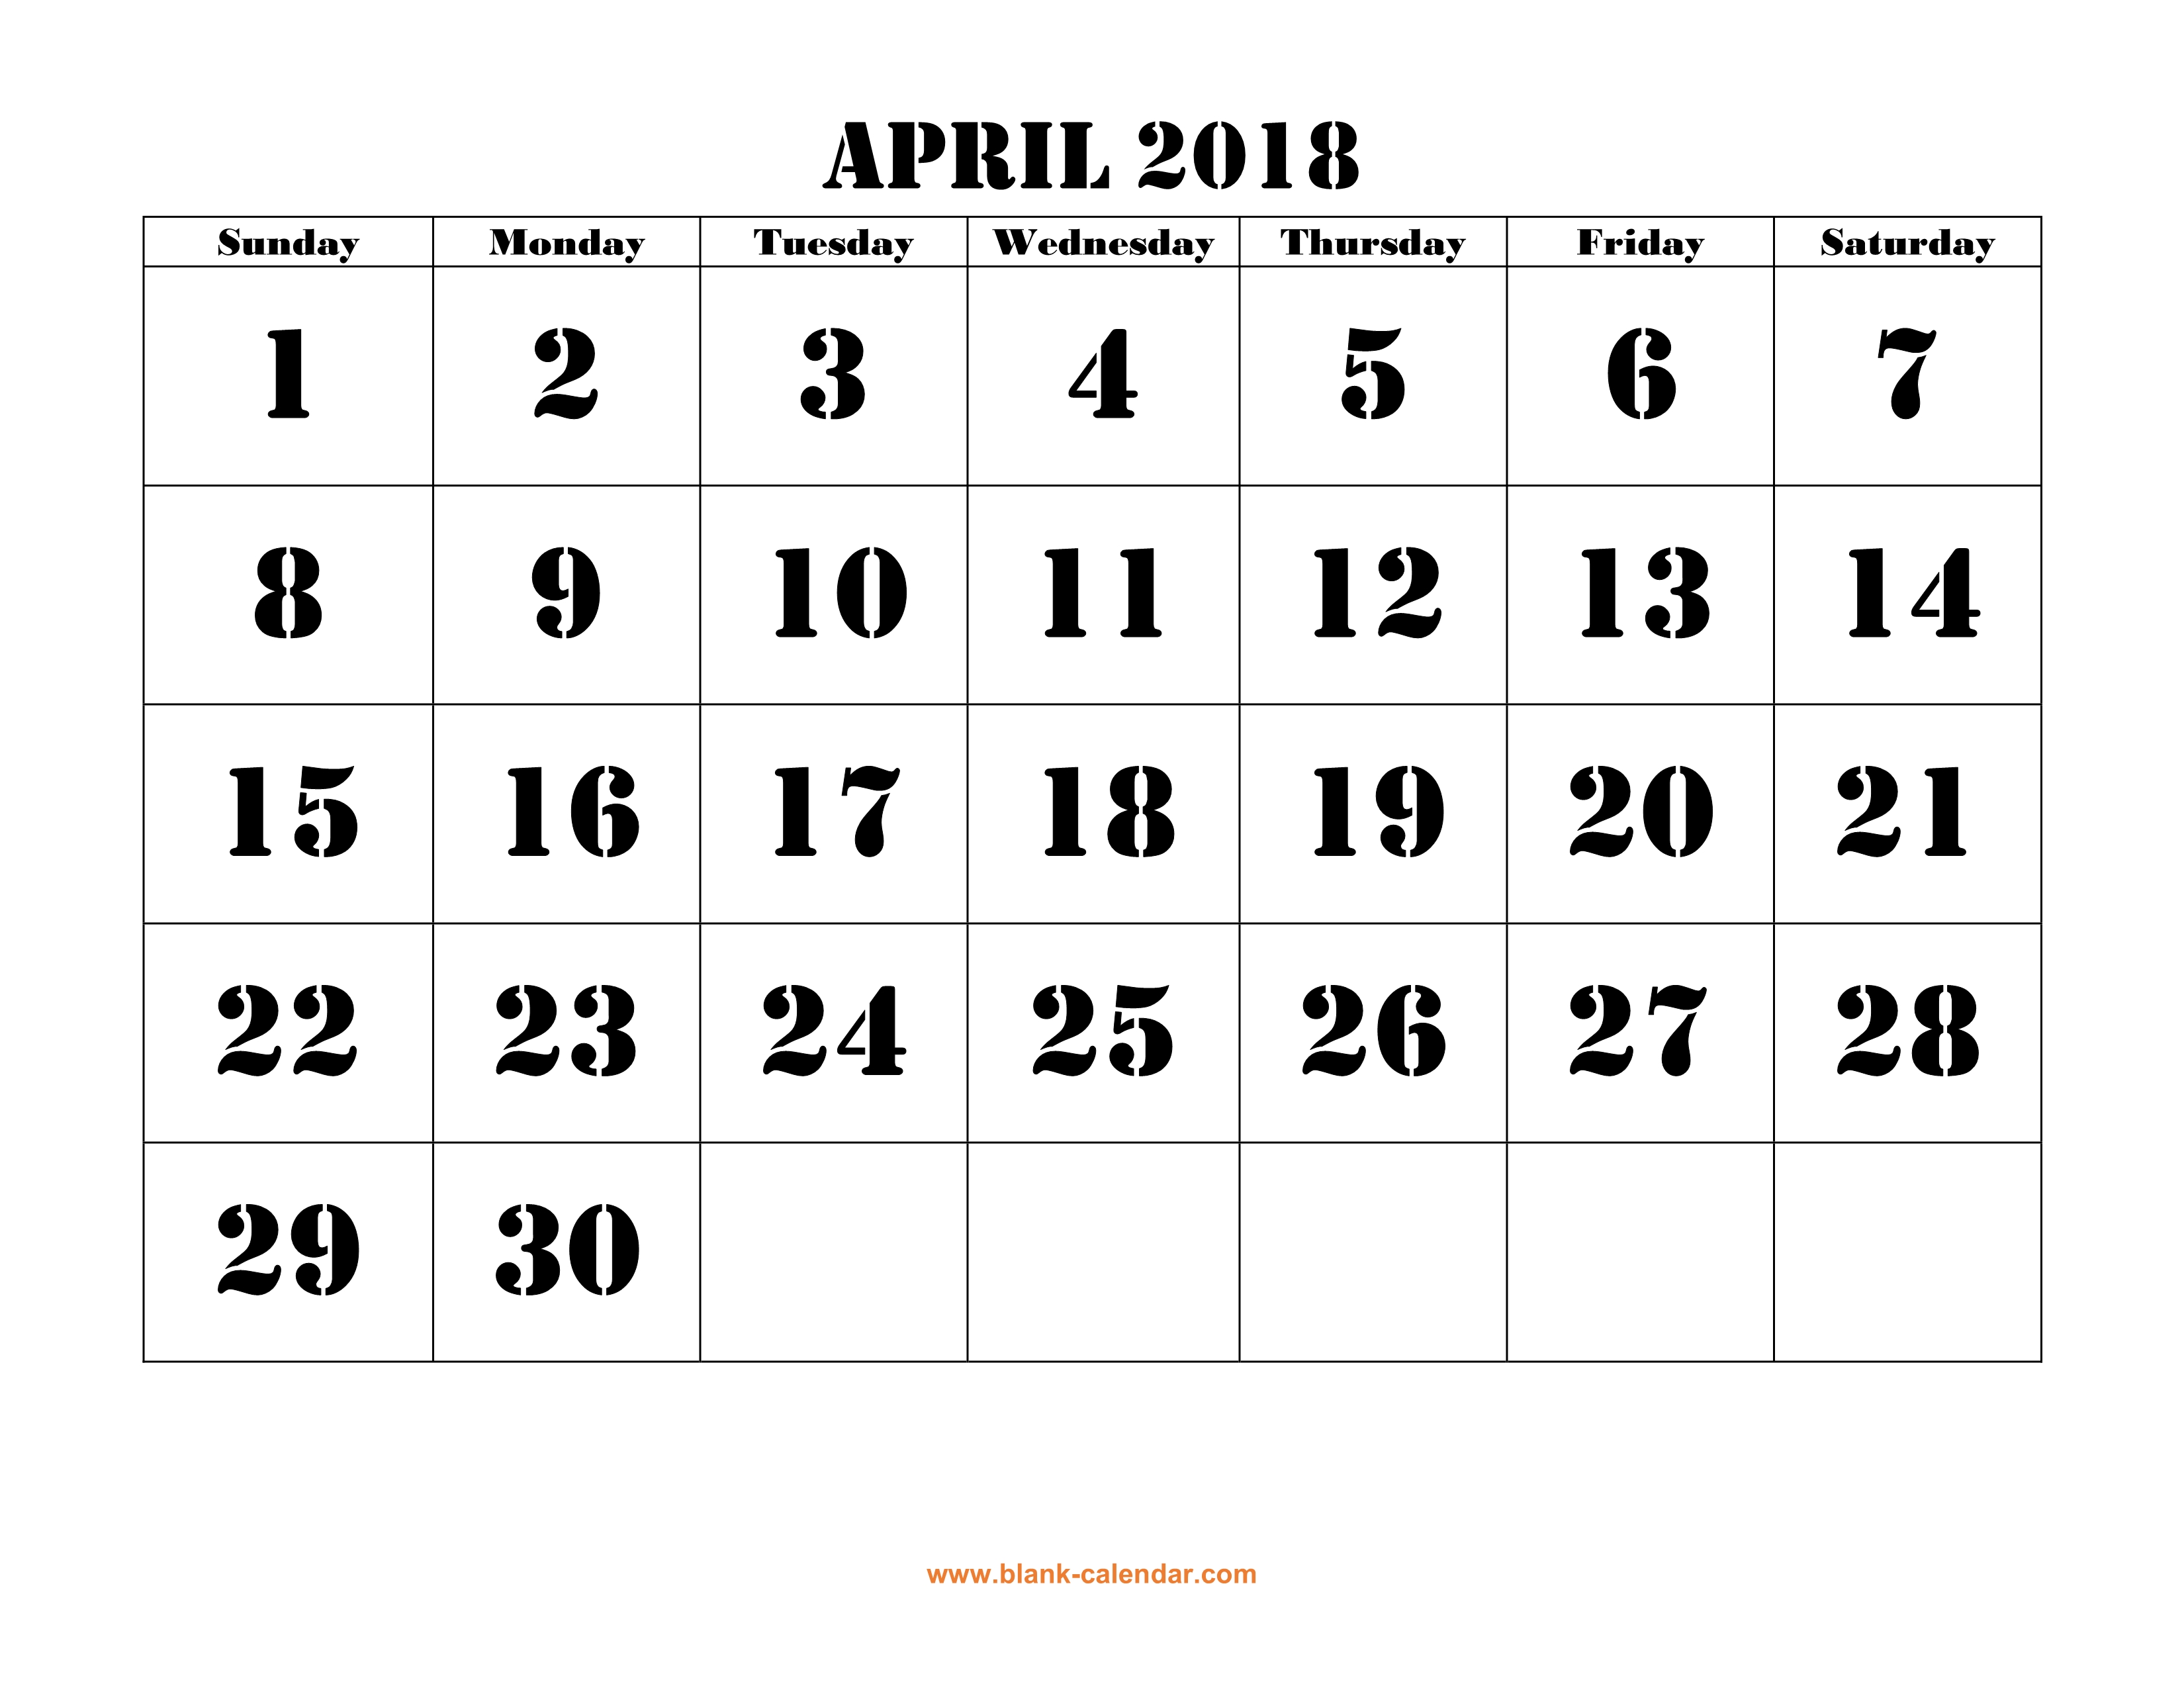 march-2018-calendar-with-holidays-free-pdf-printable-quote-images-hd-free